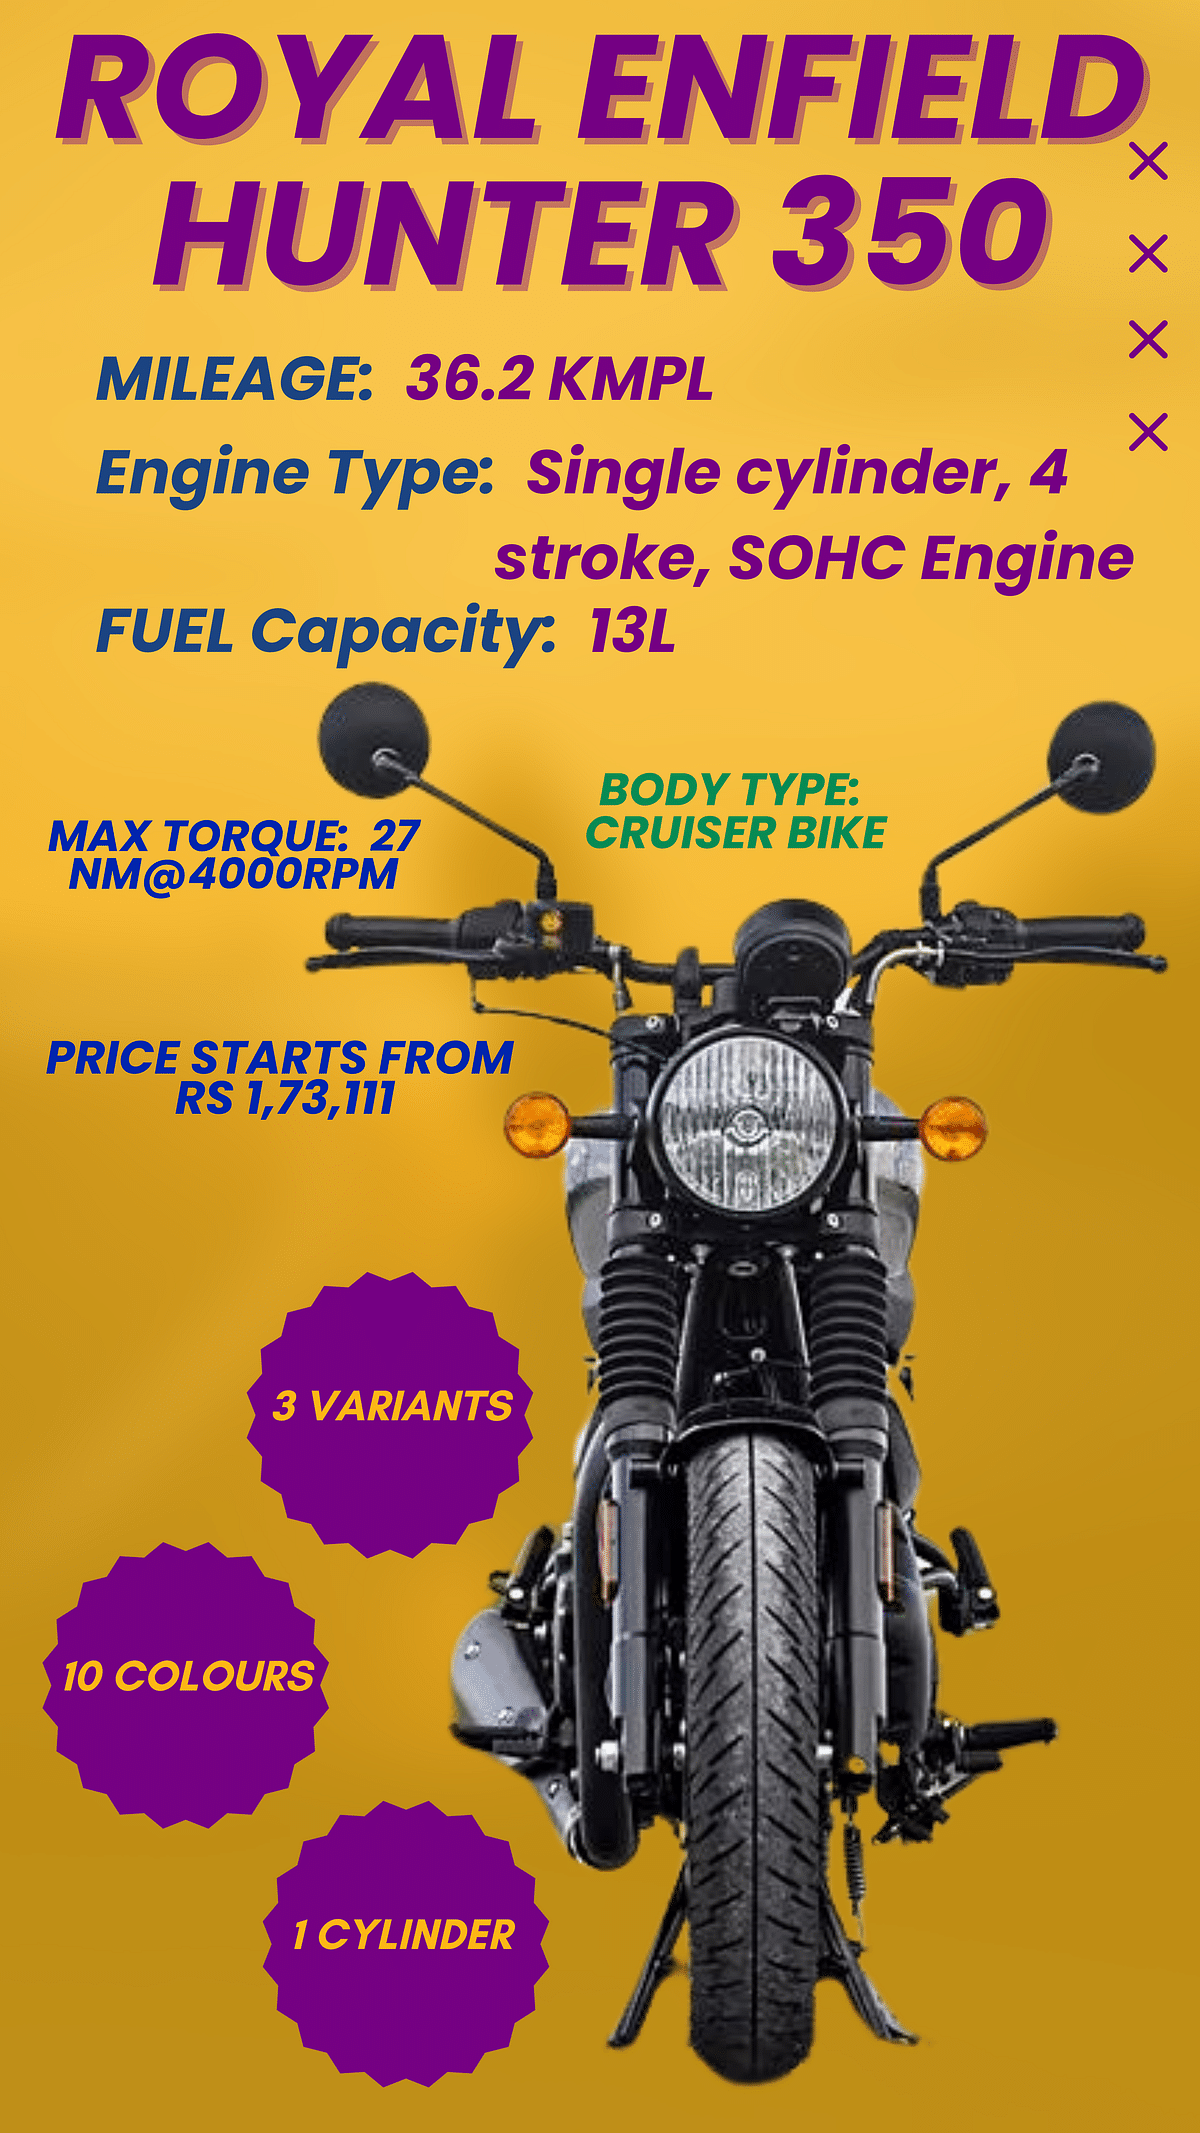 Royal Enfield Hunter 350  features 